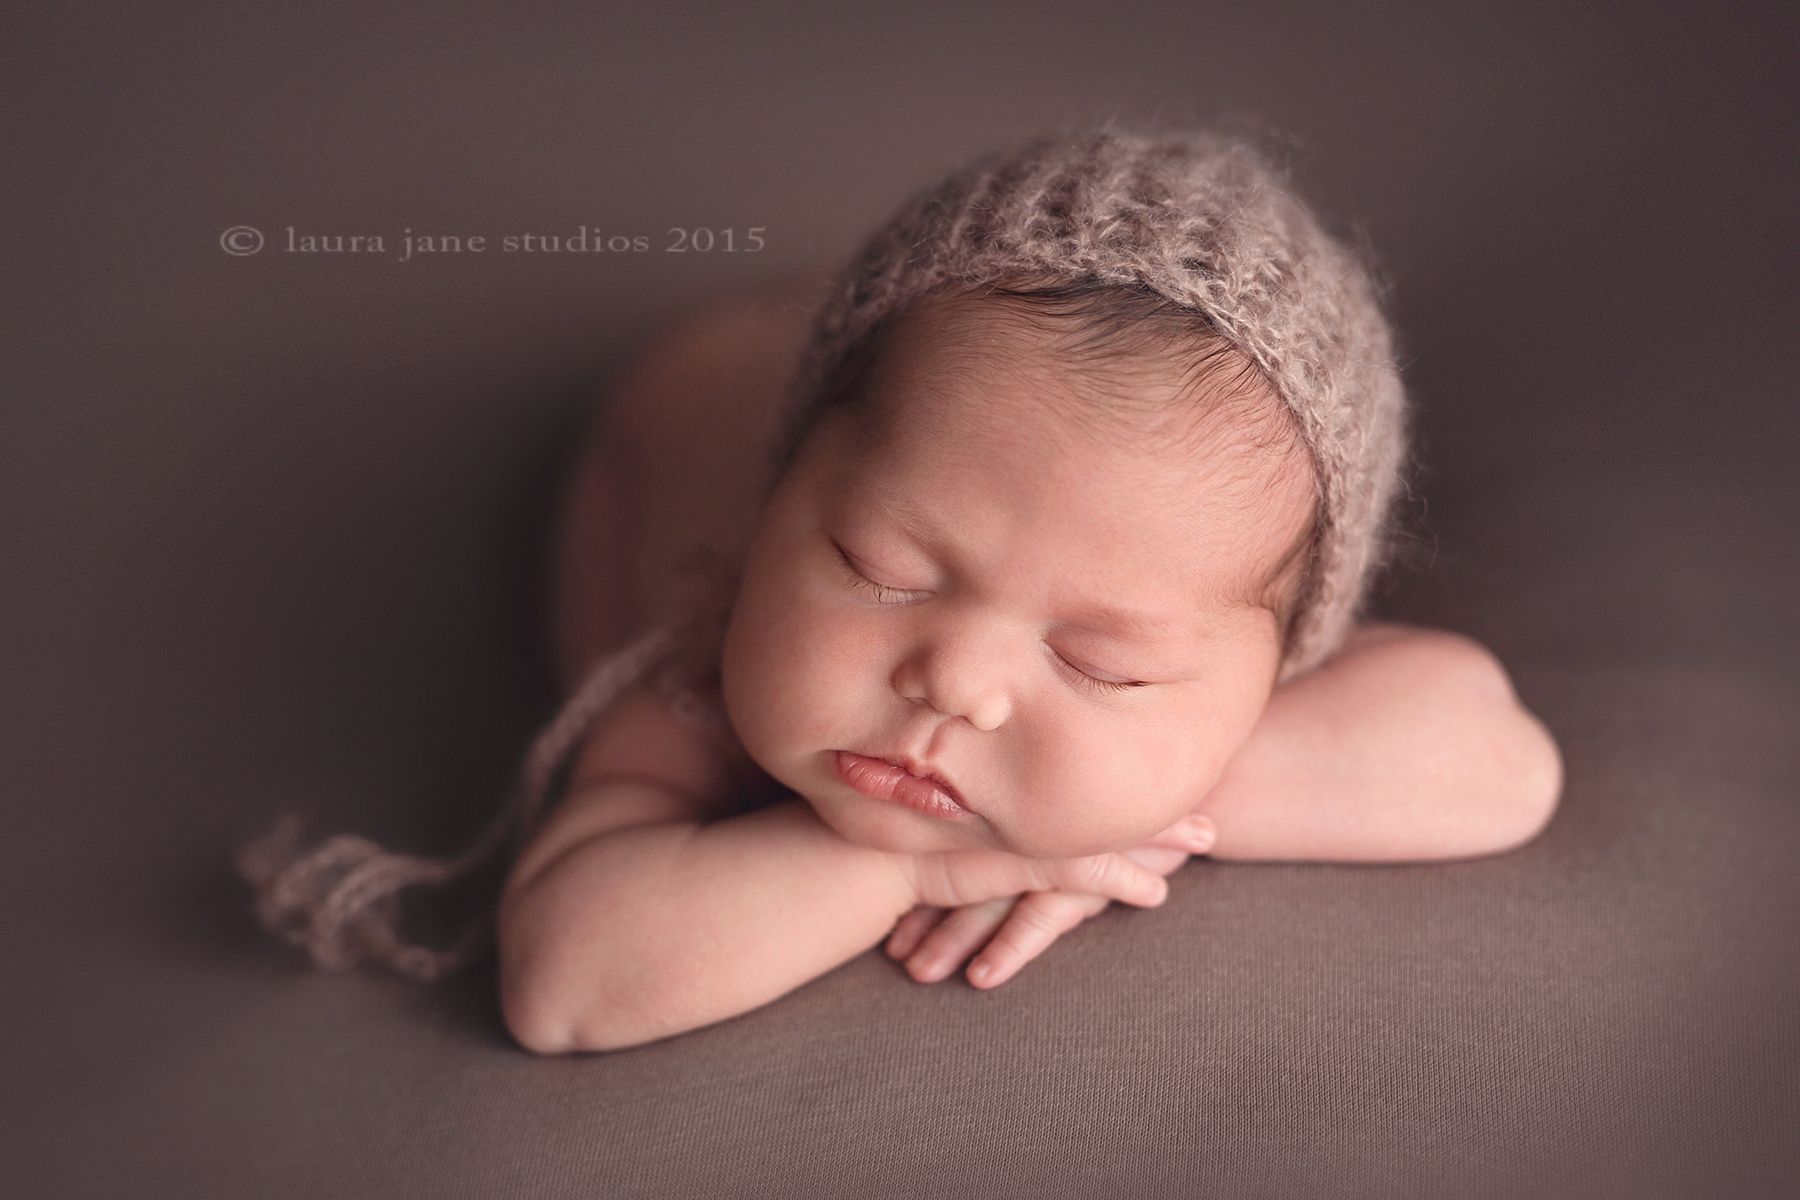 How to choose a photographer for newborn photography